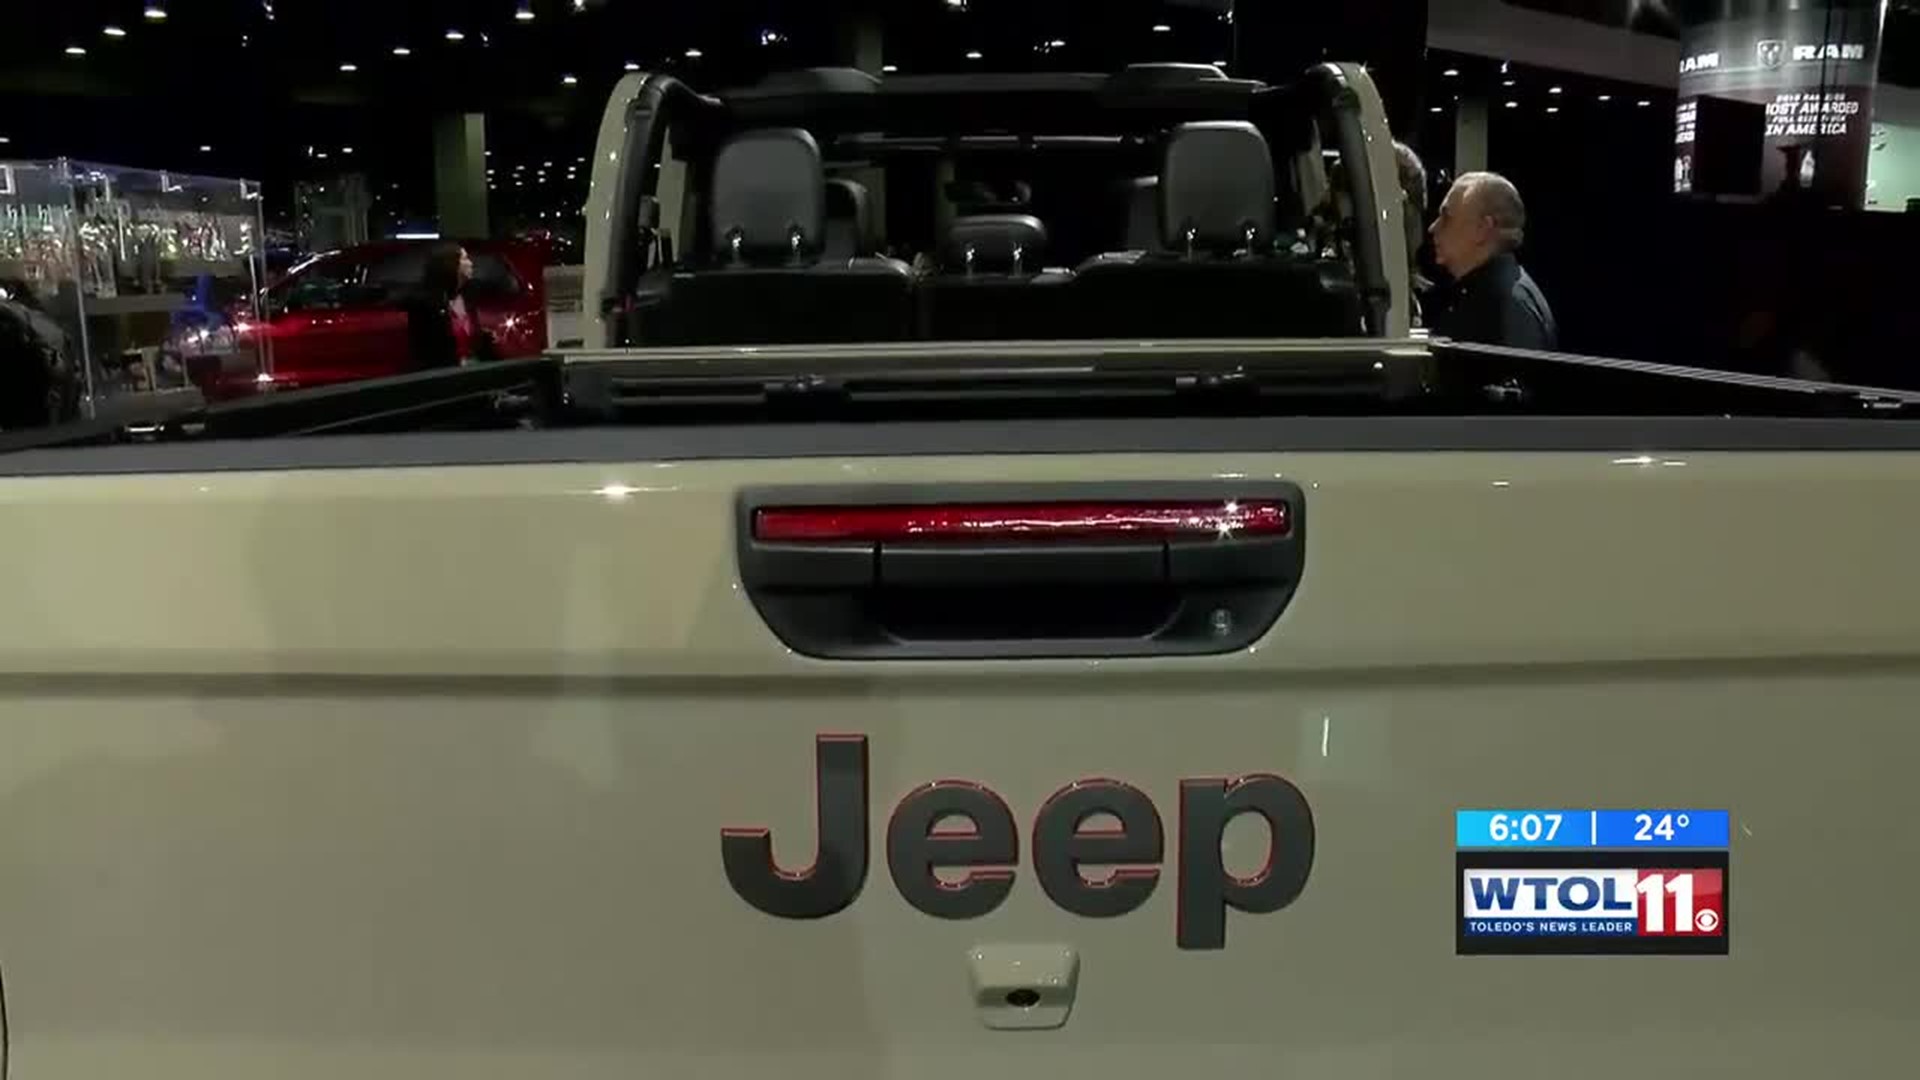 Two months after reveal, Jeep Gladiator still generating hype